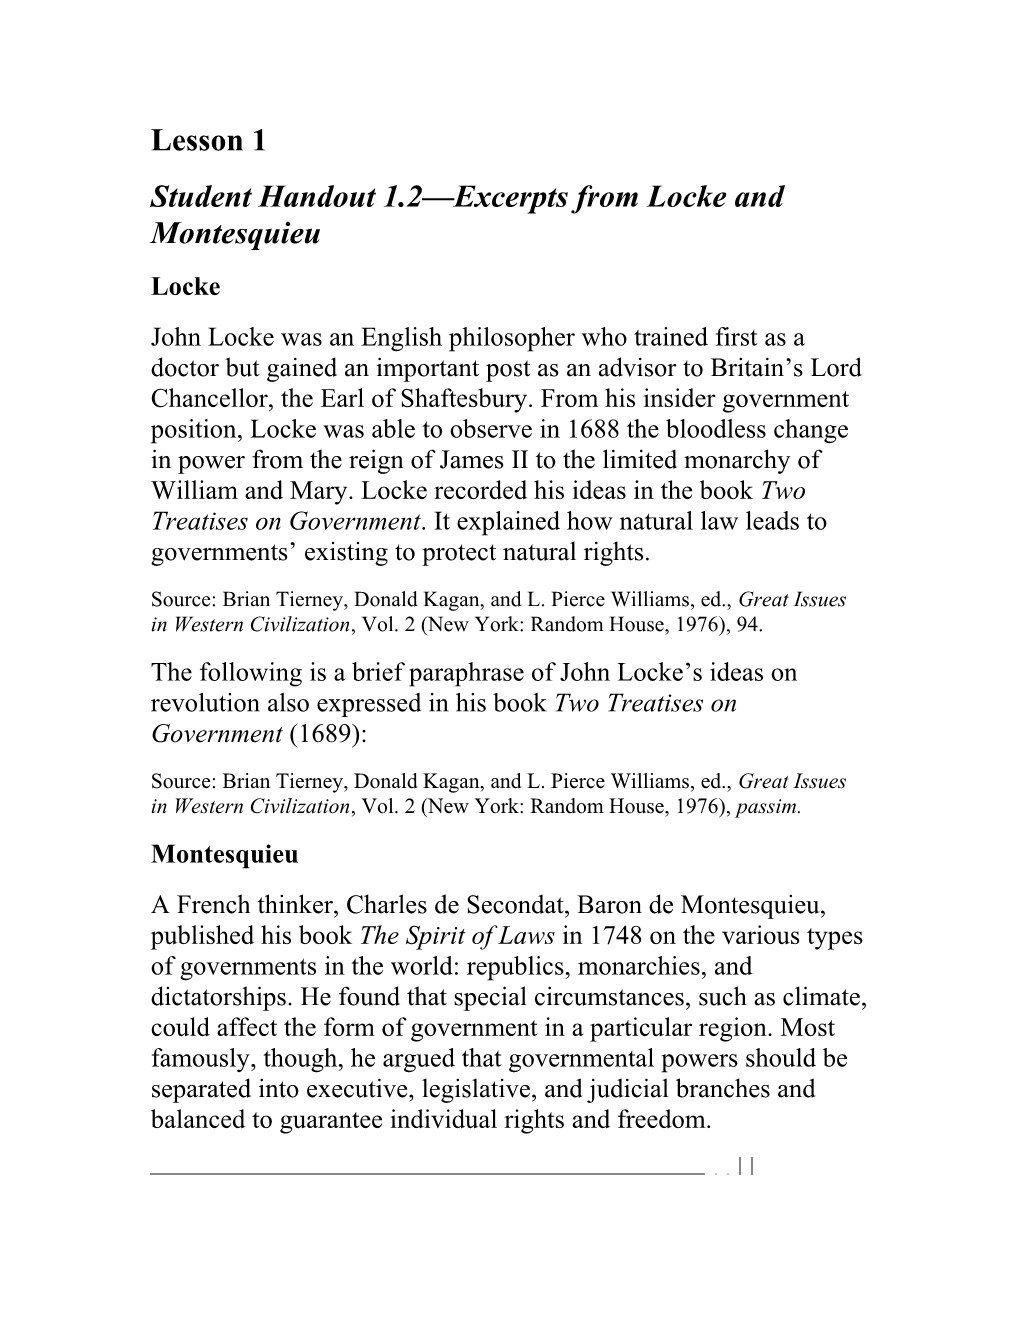 Student Handout 1.2 Excerpts from Locke and Montesquieu